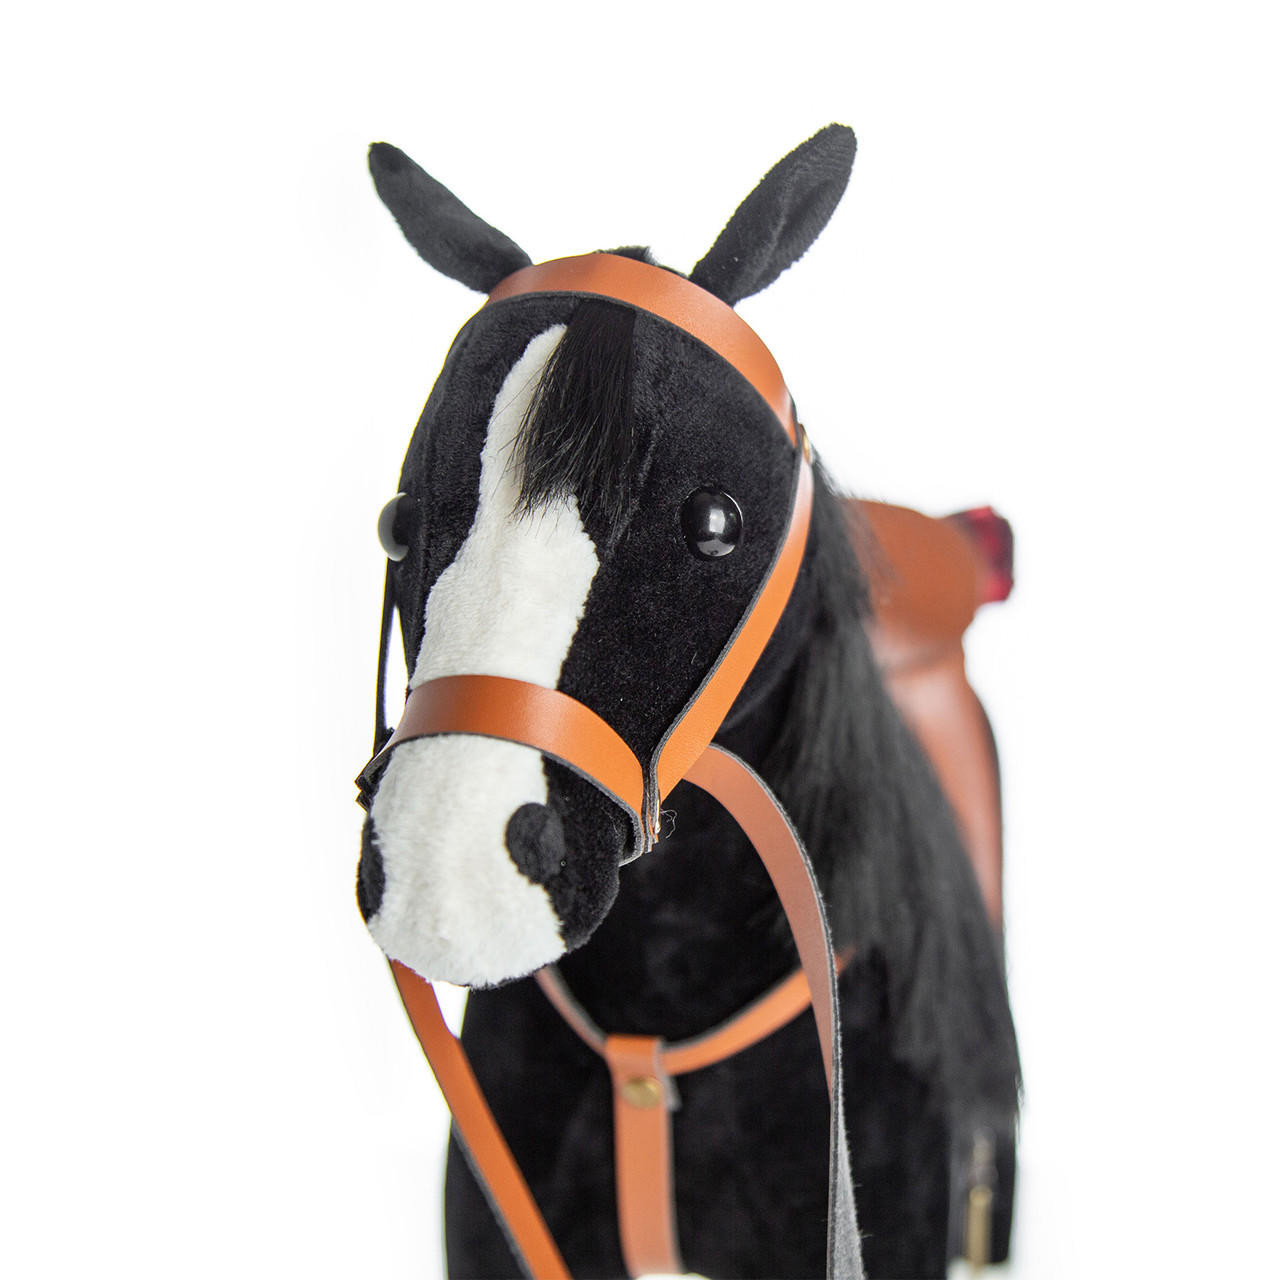 Buy Wholesale hobby horse with sound For Fun Children And Family Play Times  